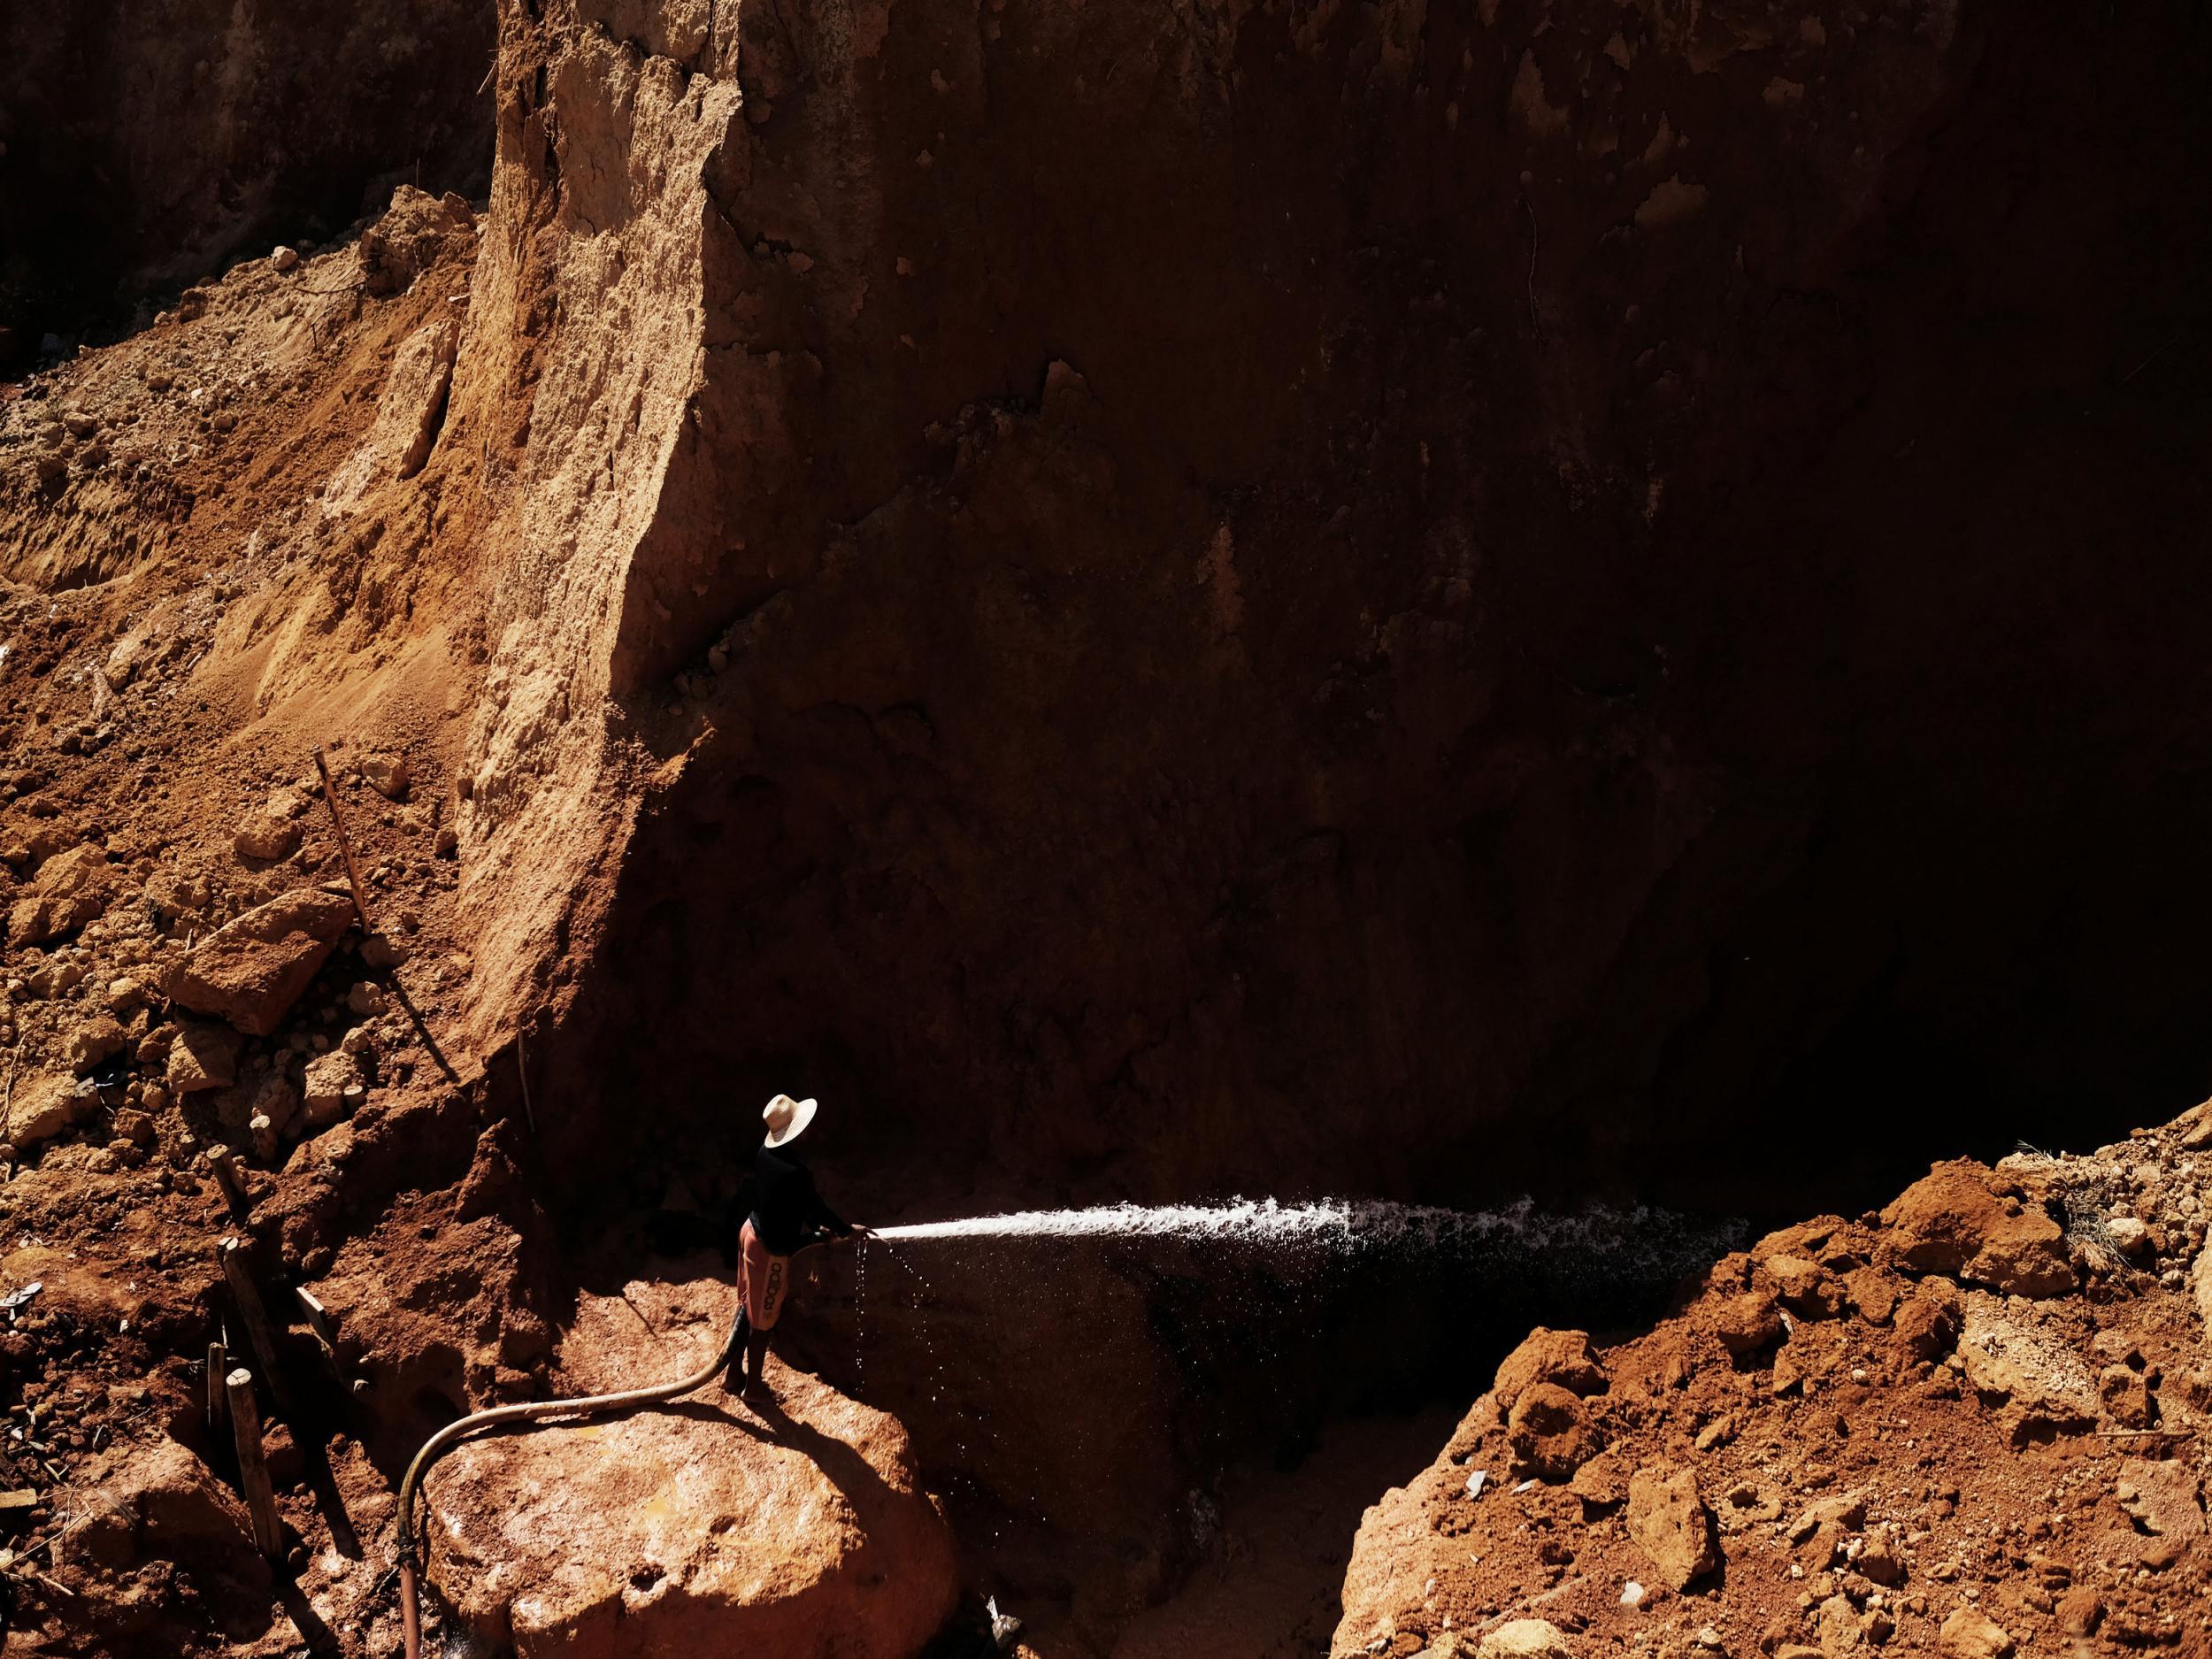 A wildcat gold miner, or garimpeiro, uses high-pressure jets of water to dislodge rock material at a wildcat mine